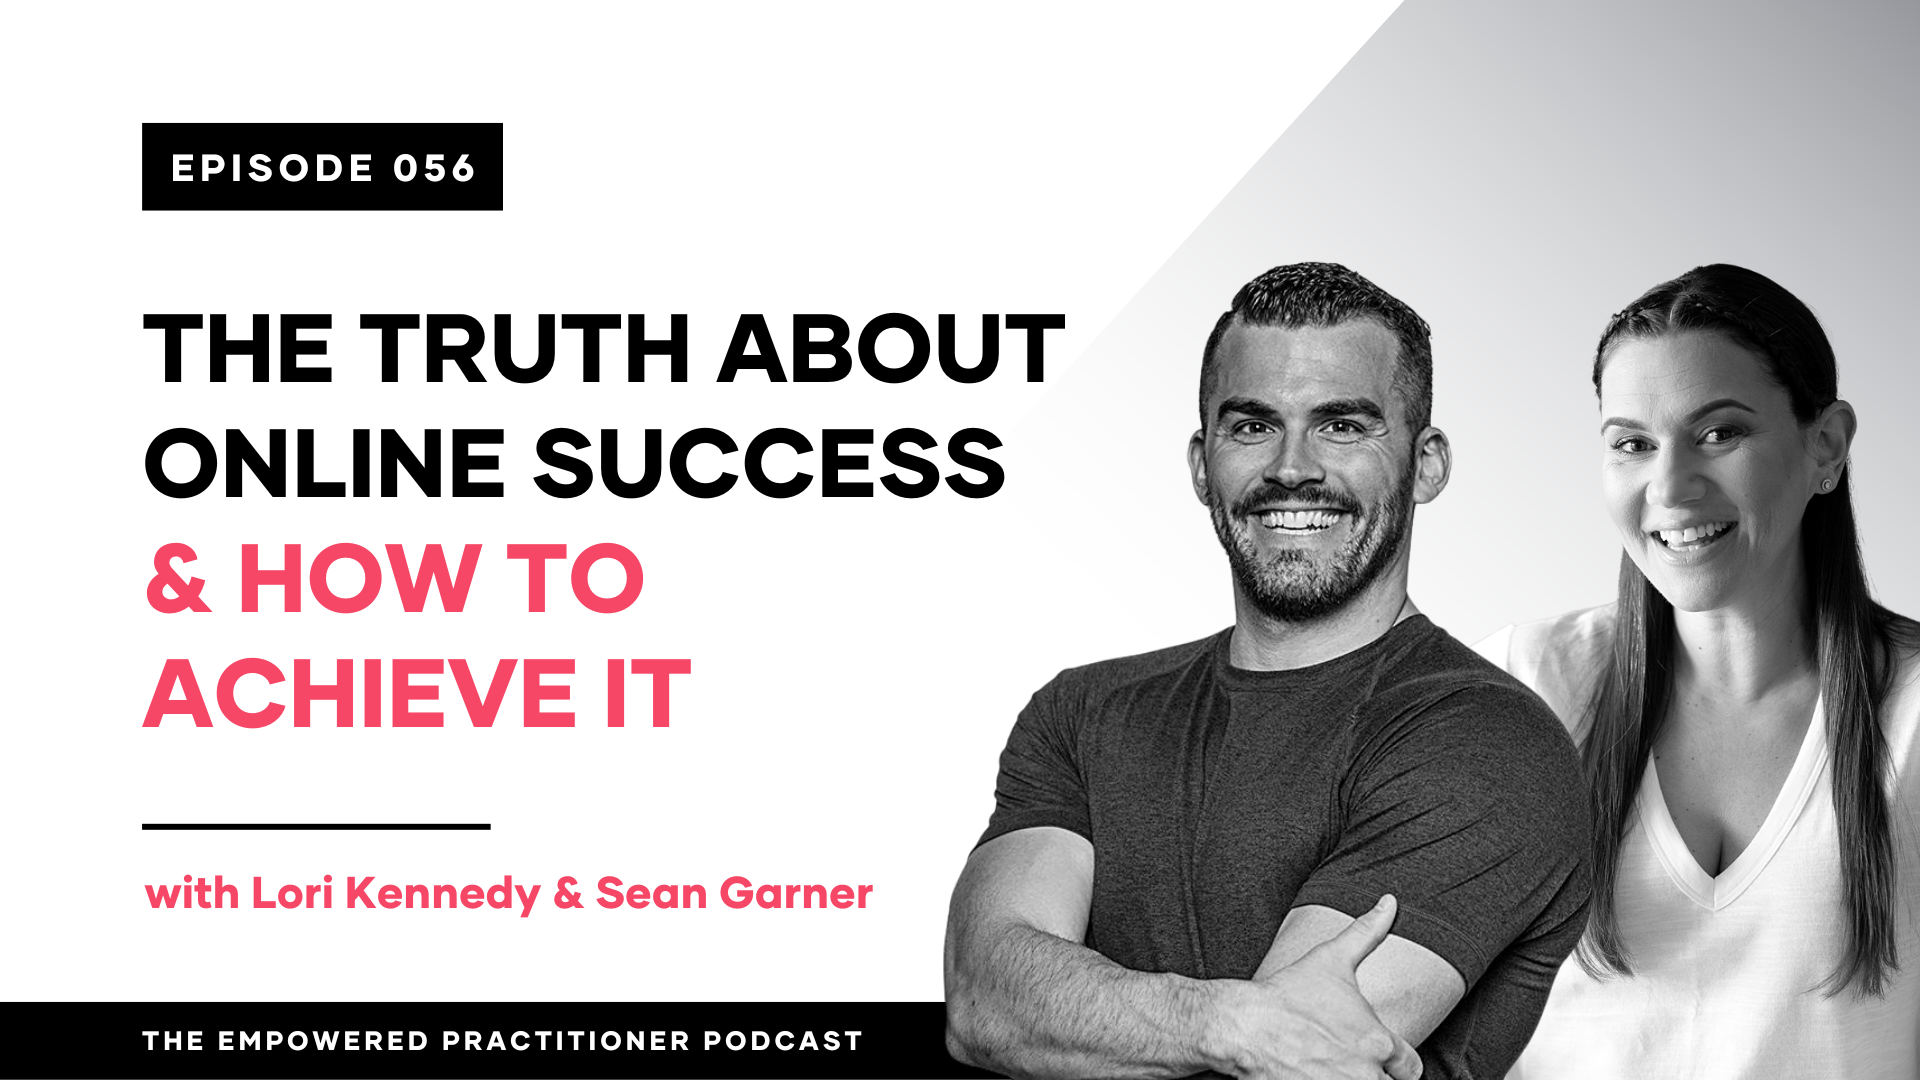 The Truth About Online Success & How To Achieve It